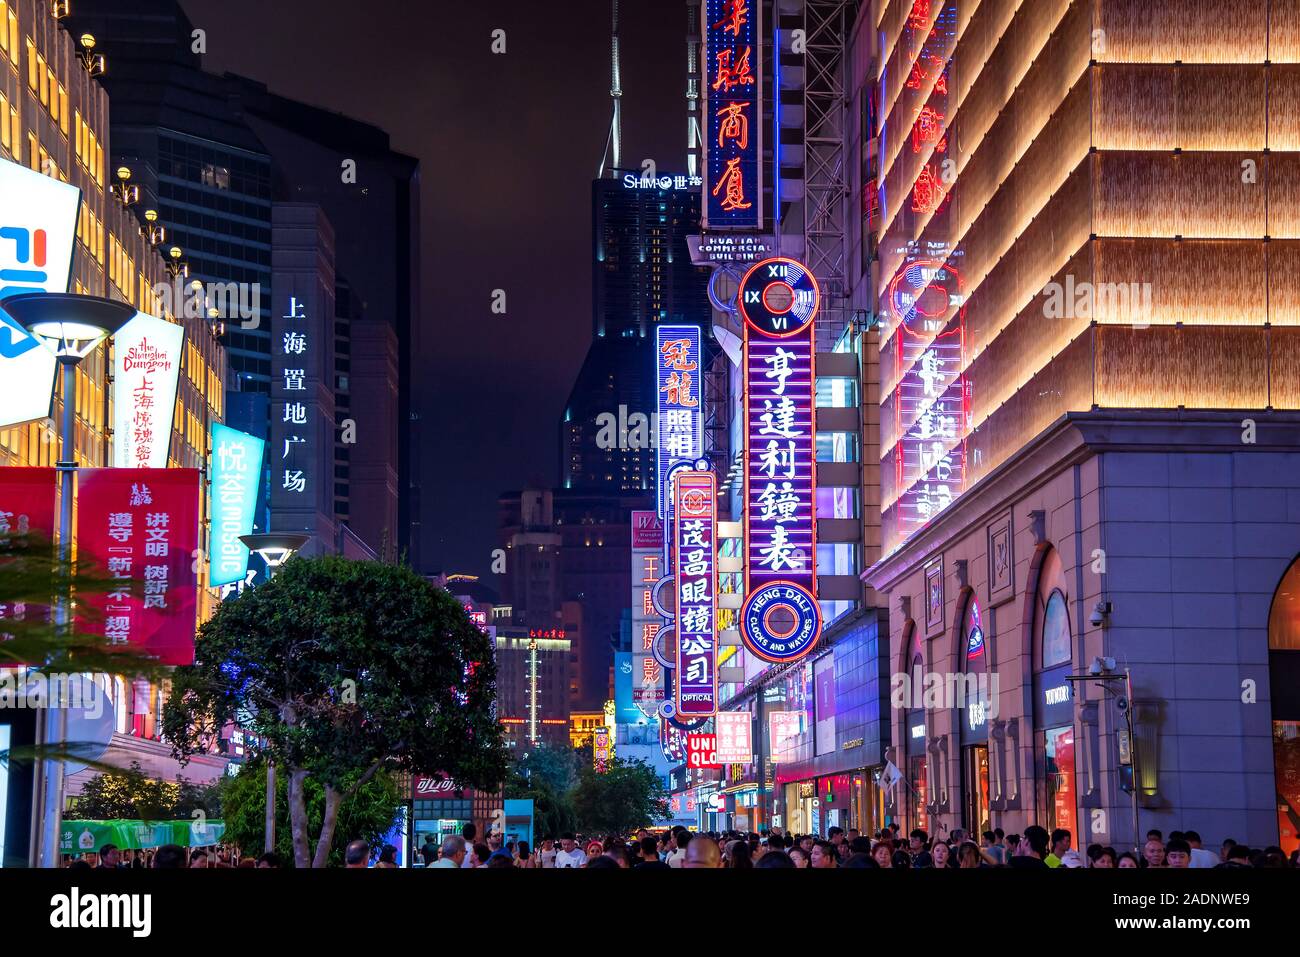 Shanghai, China - August 7, 2019: Nanjing road in downtown Shanghai with neon signs and shops and tourists walking around at night Stock Photo